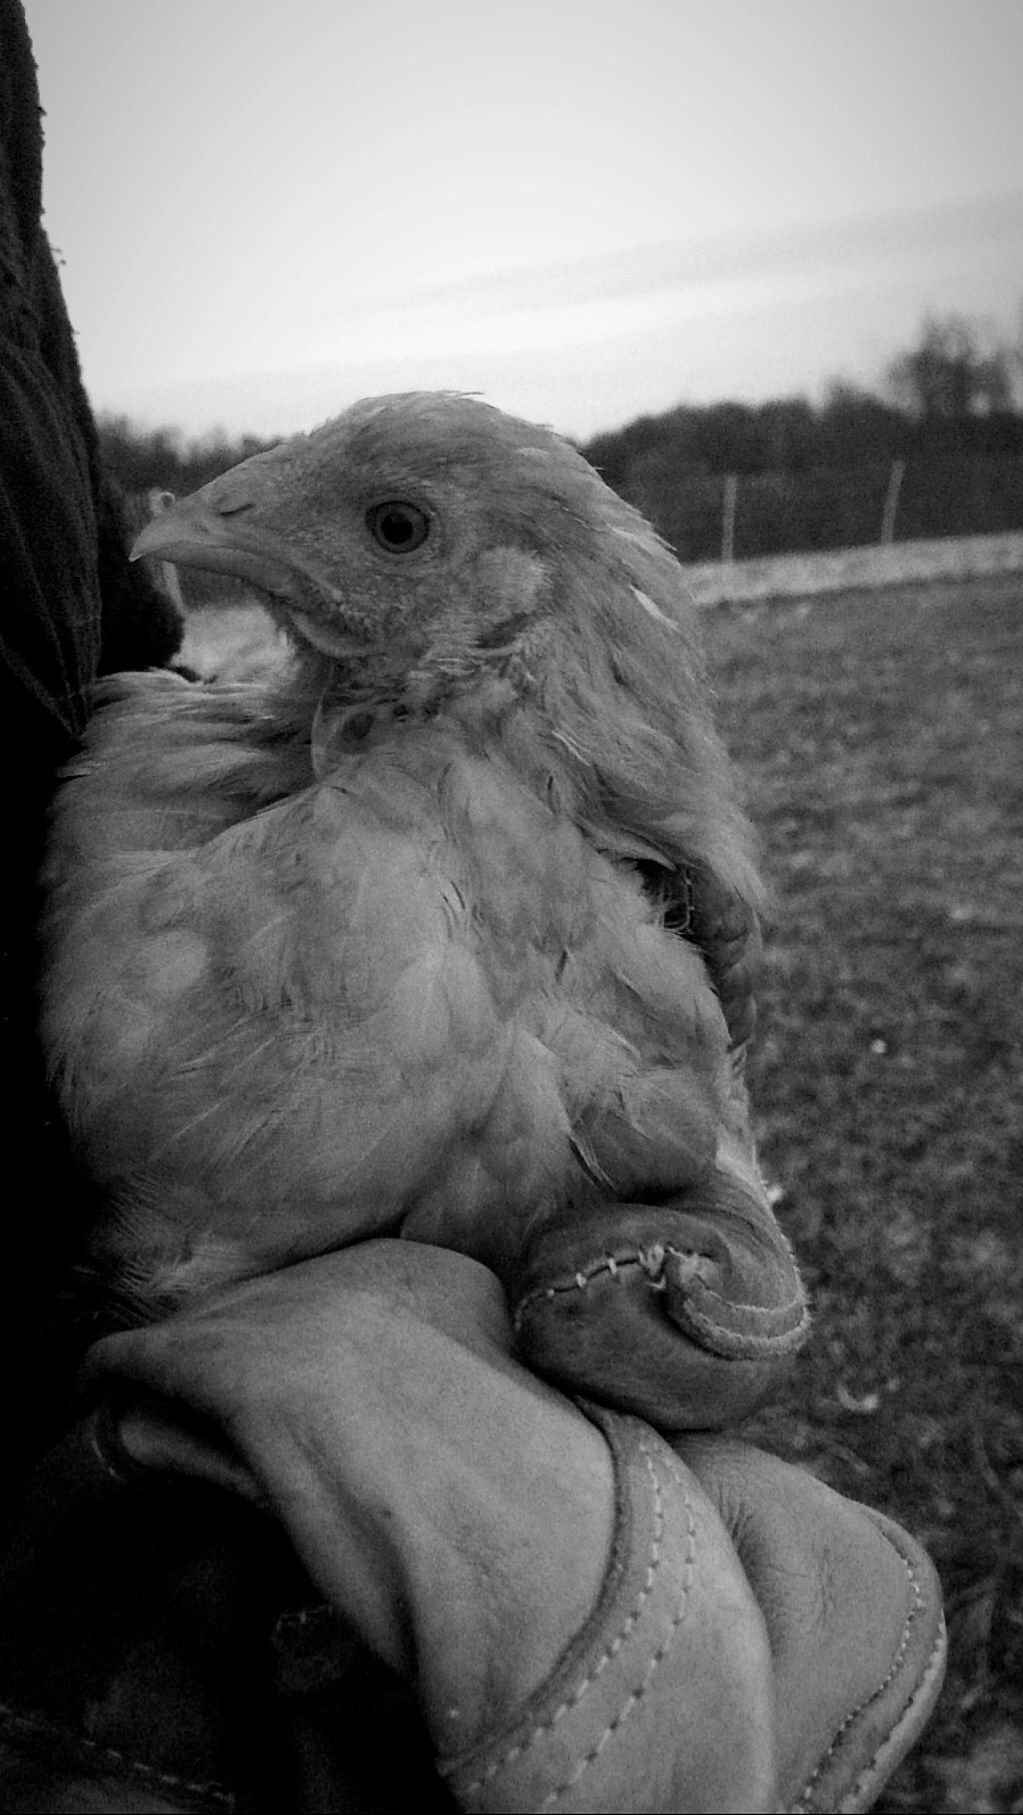 Pastured Chicken being held by farmer on a cold day. 